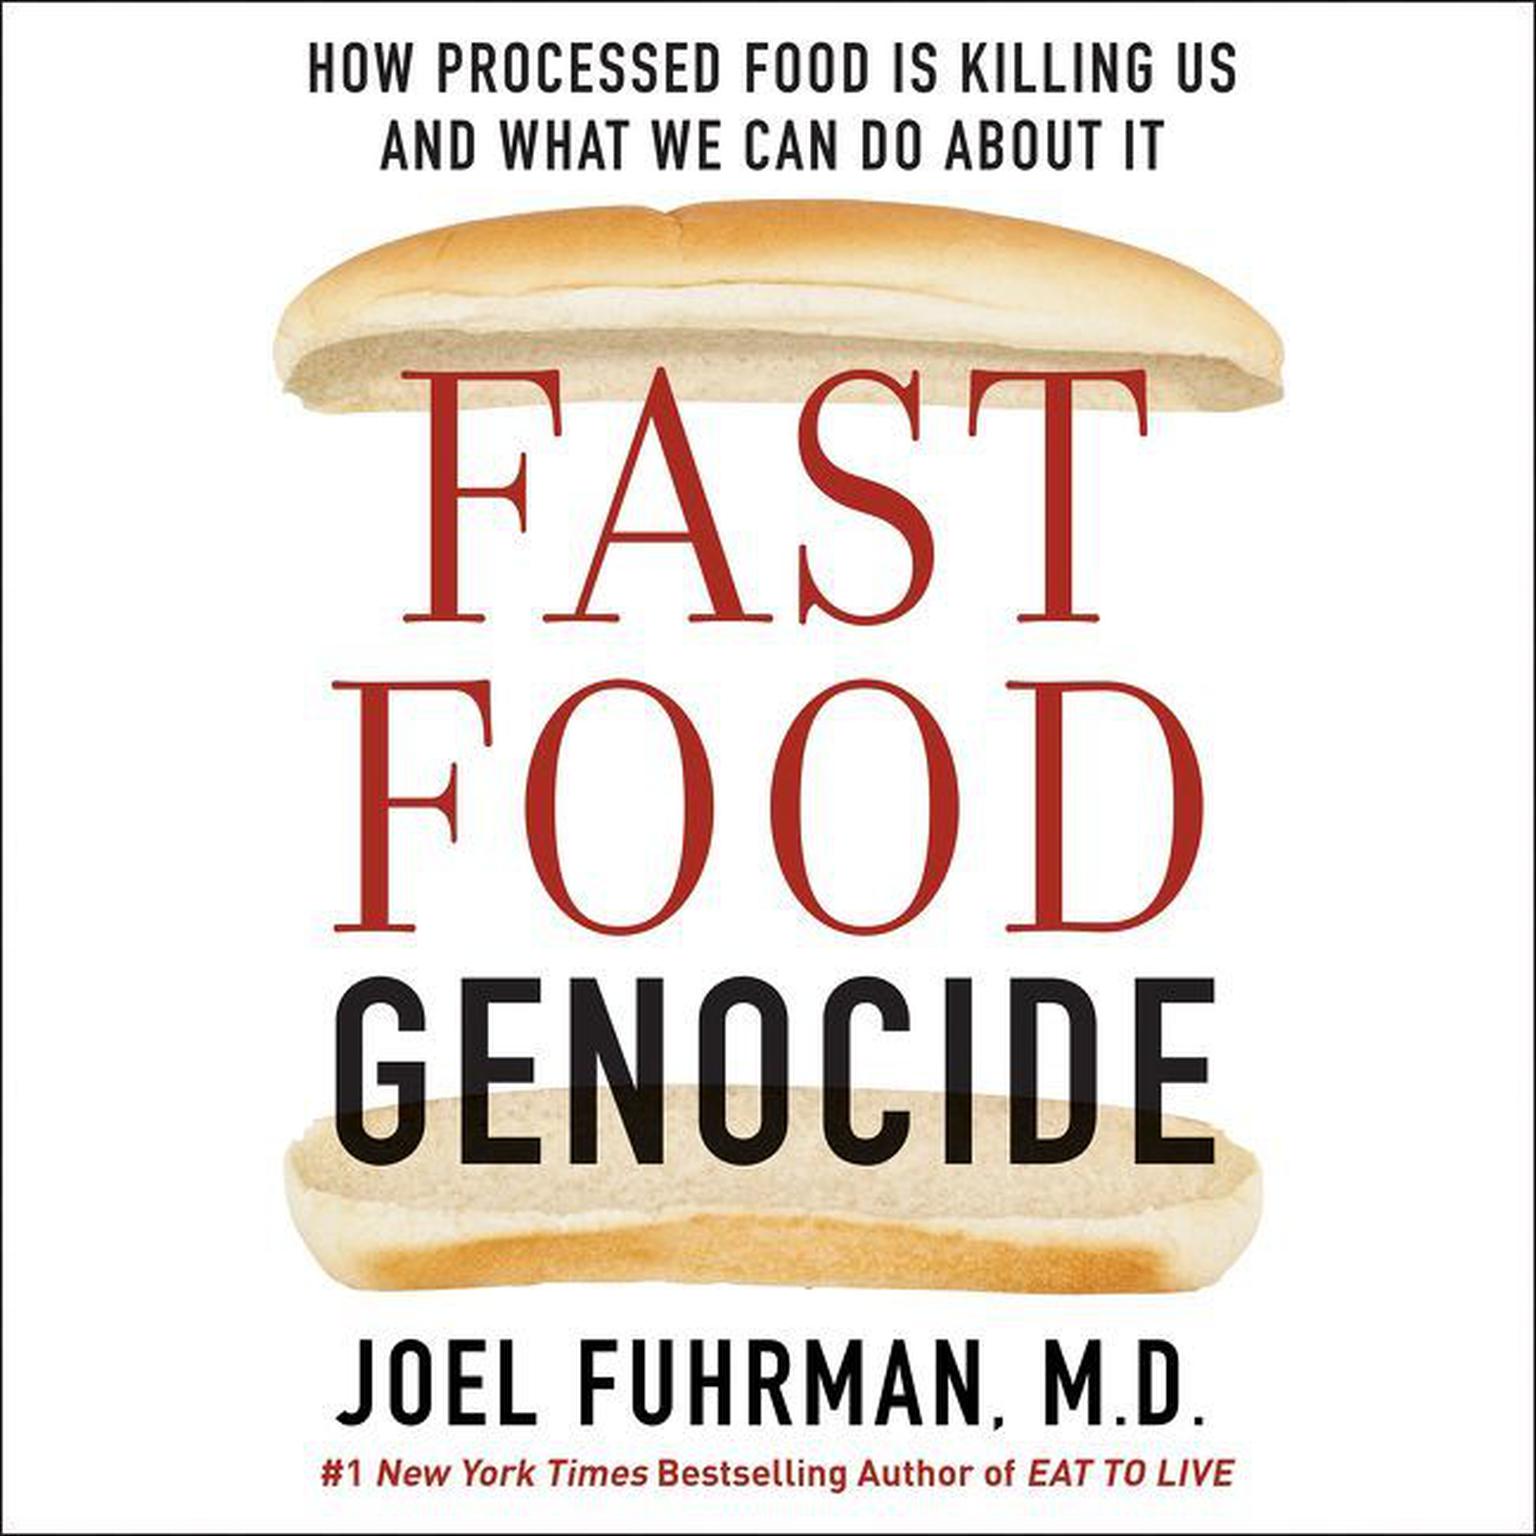 Fast Food Genocide: How Processed Food is Killing Us and What We Can Do About It Audiobook, by Joel Fuhrman